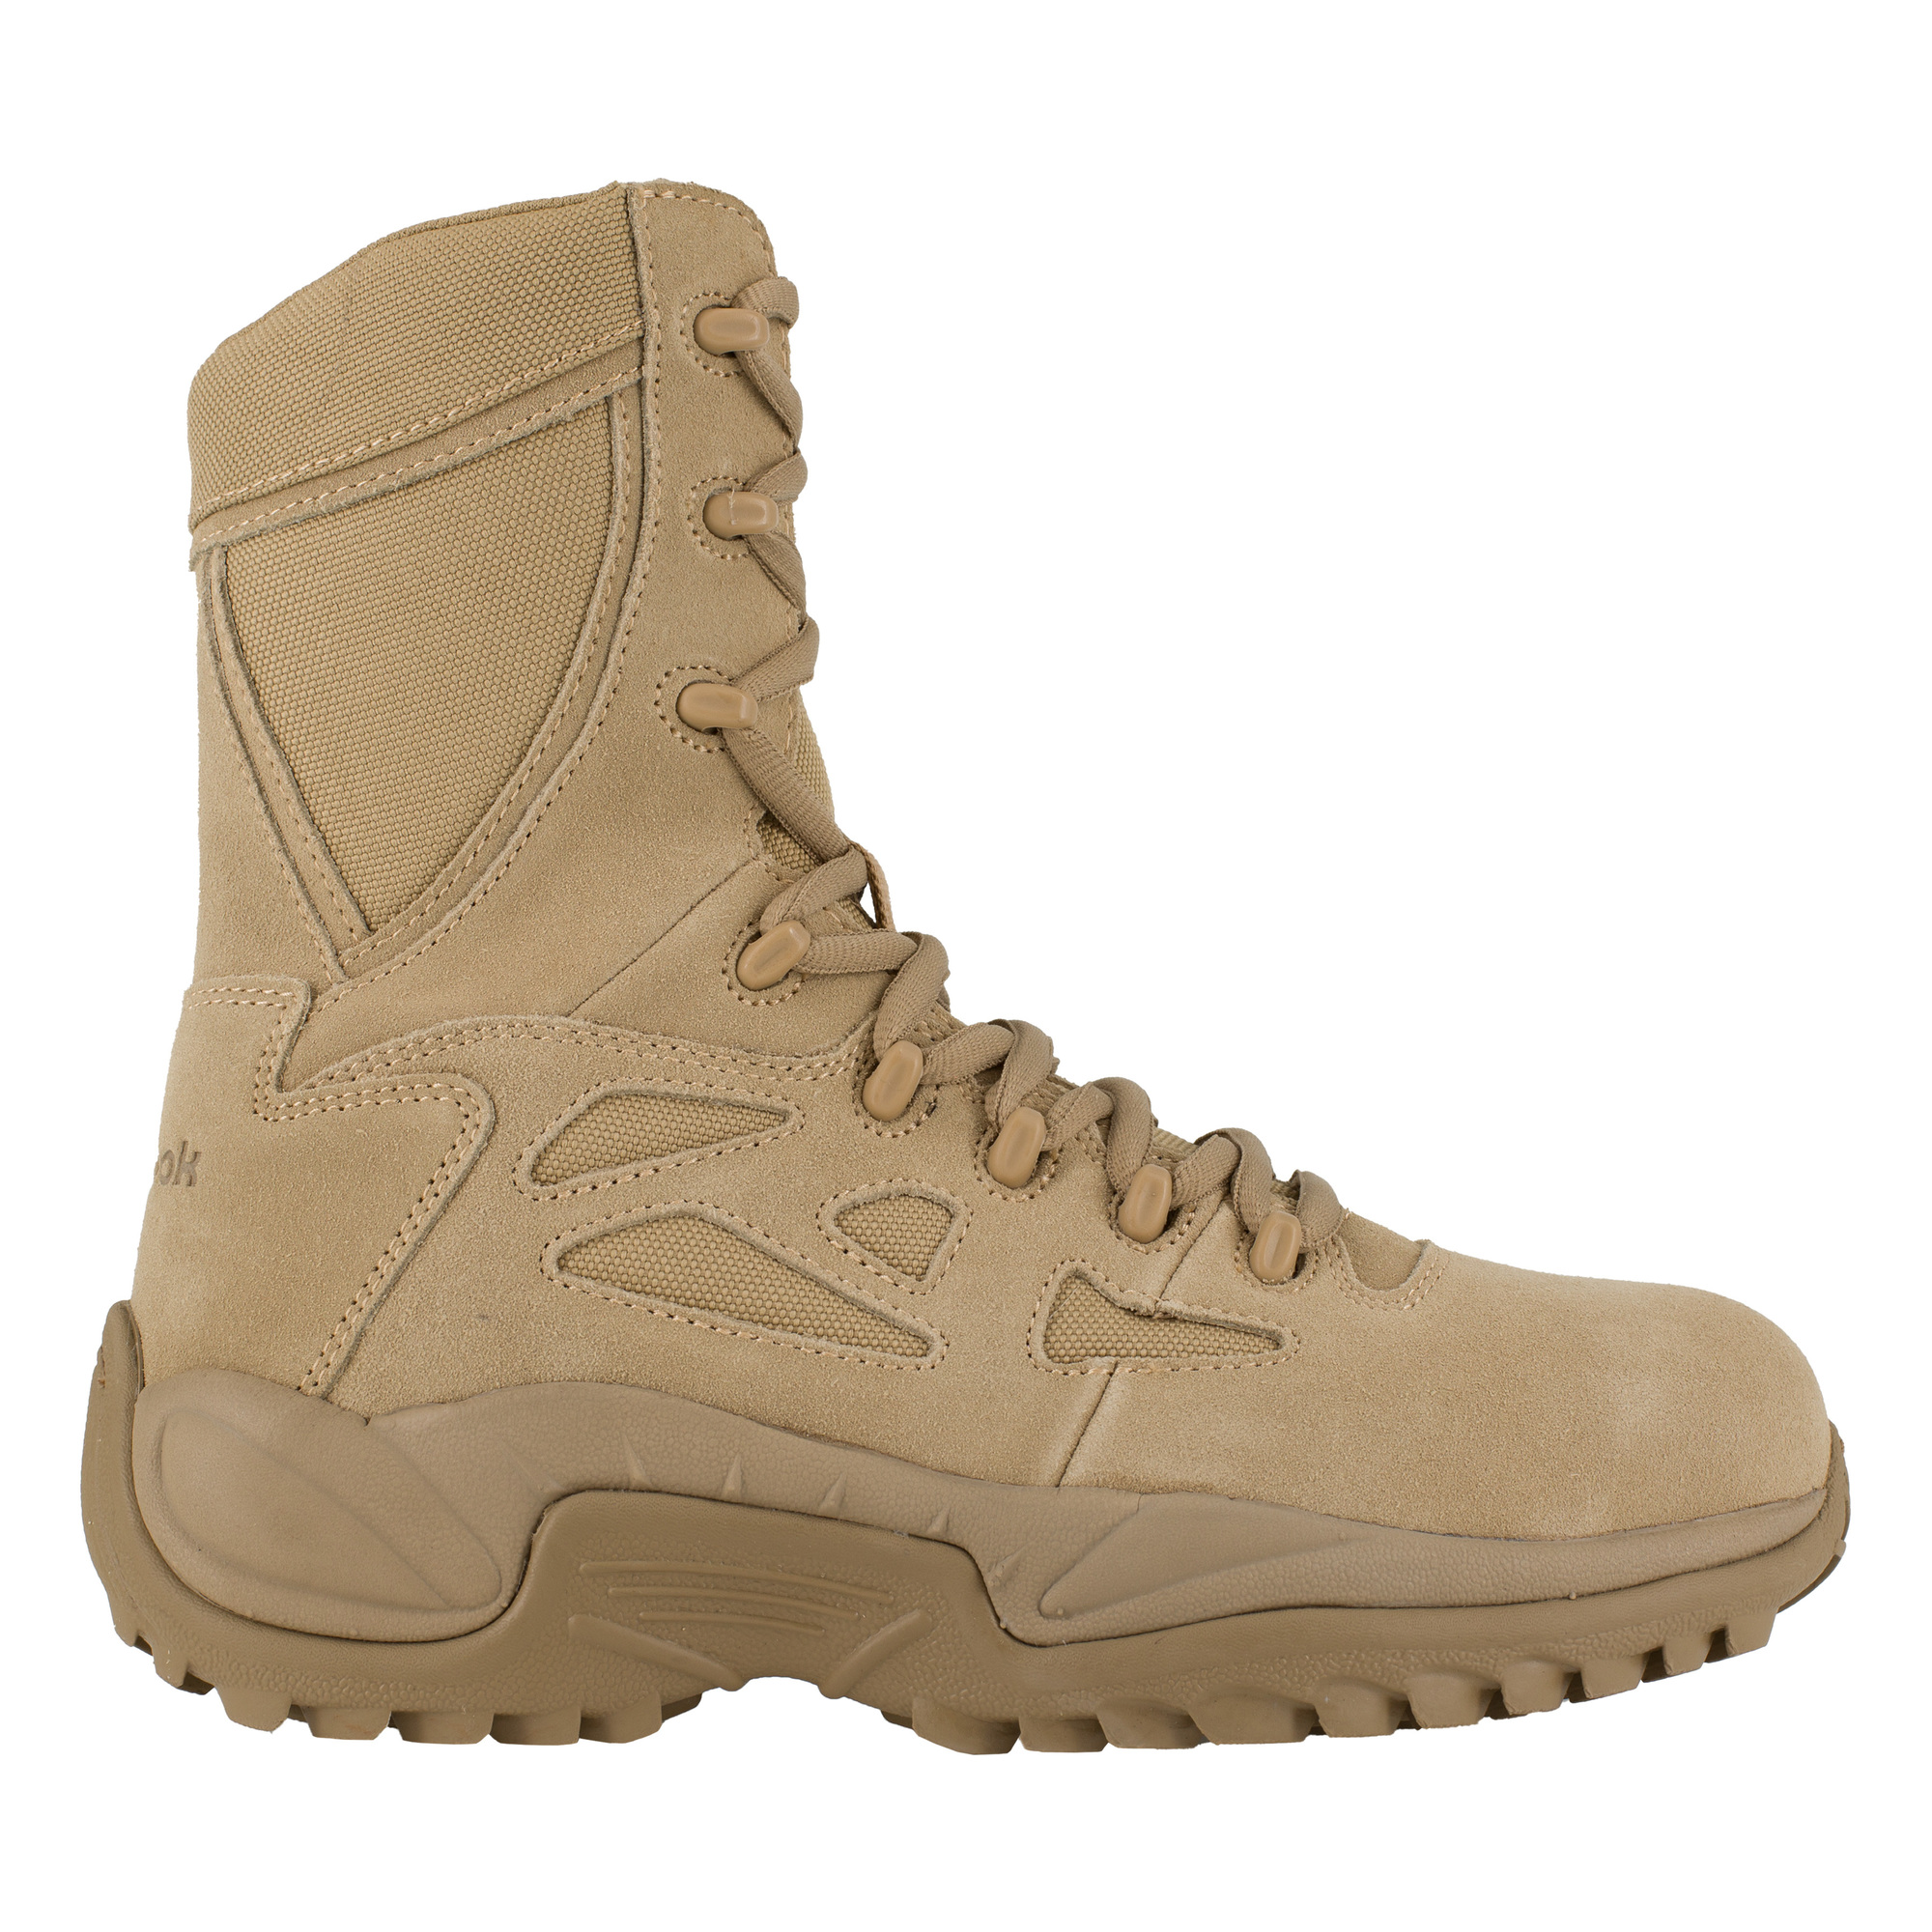 Reebok, 8Inch Stealth Tactical Boot with Side Zipper, Size 6, Width Medium, Color Desert Tan, Model RB894 -  RB894-M-06.0